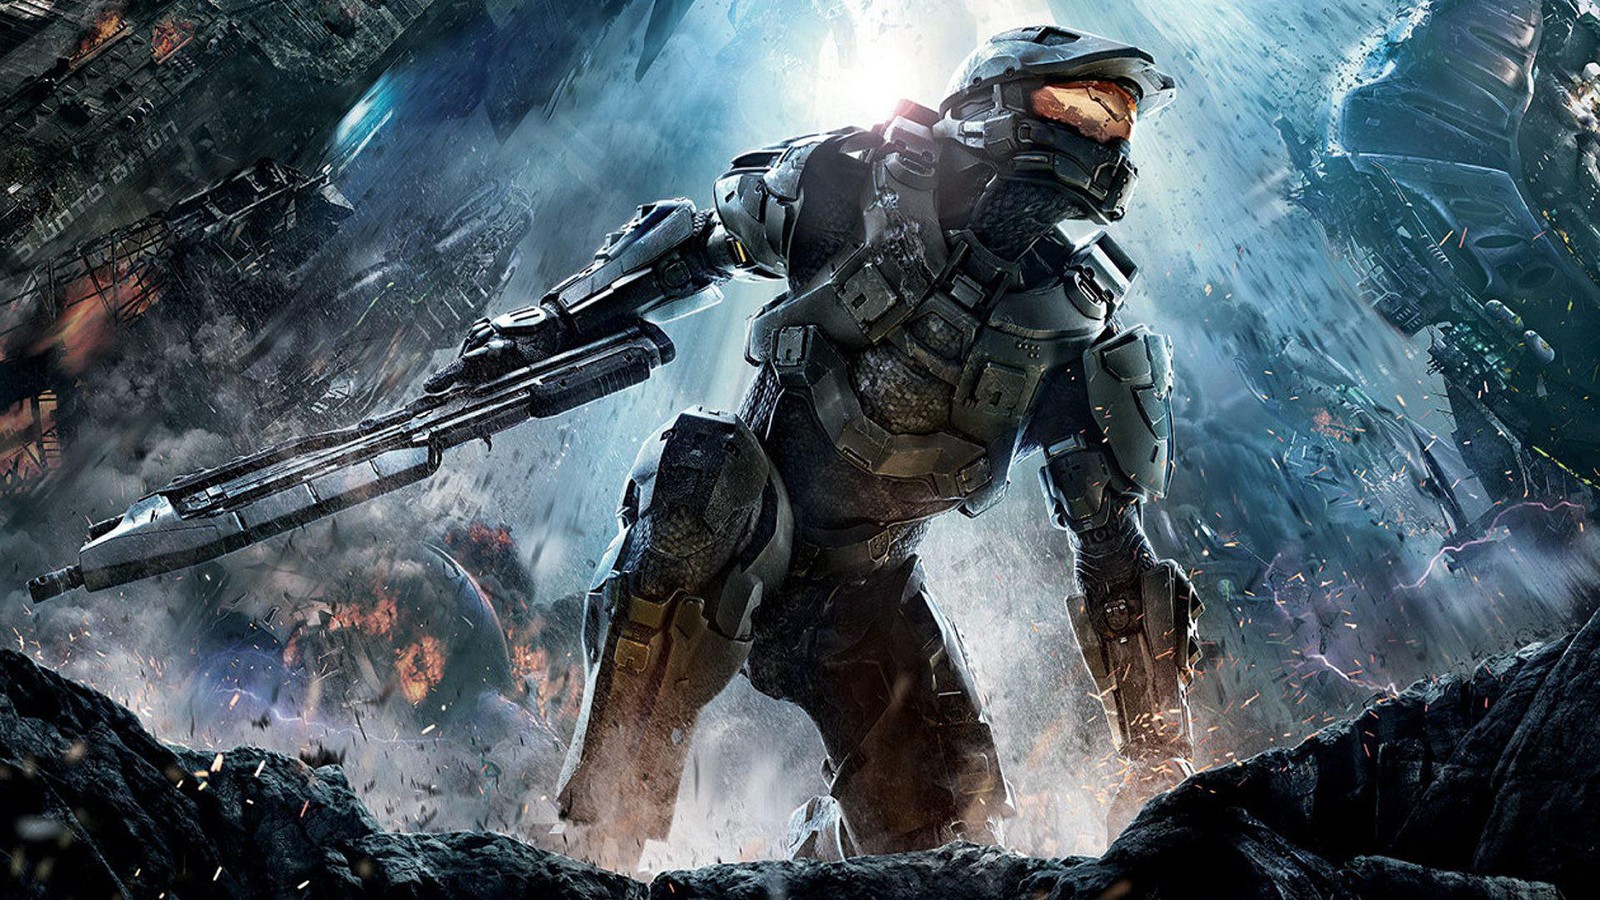  Halo composers suing Microsoft for two decades of royalty payments 